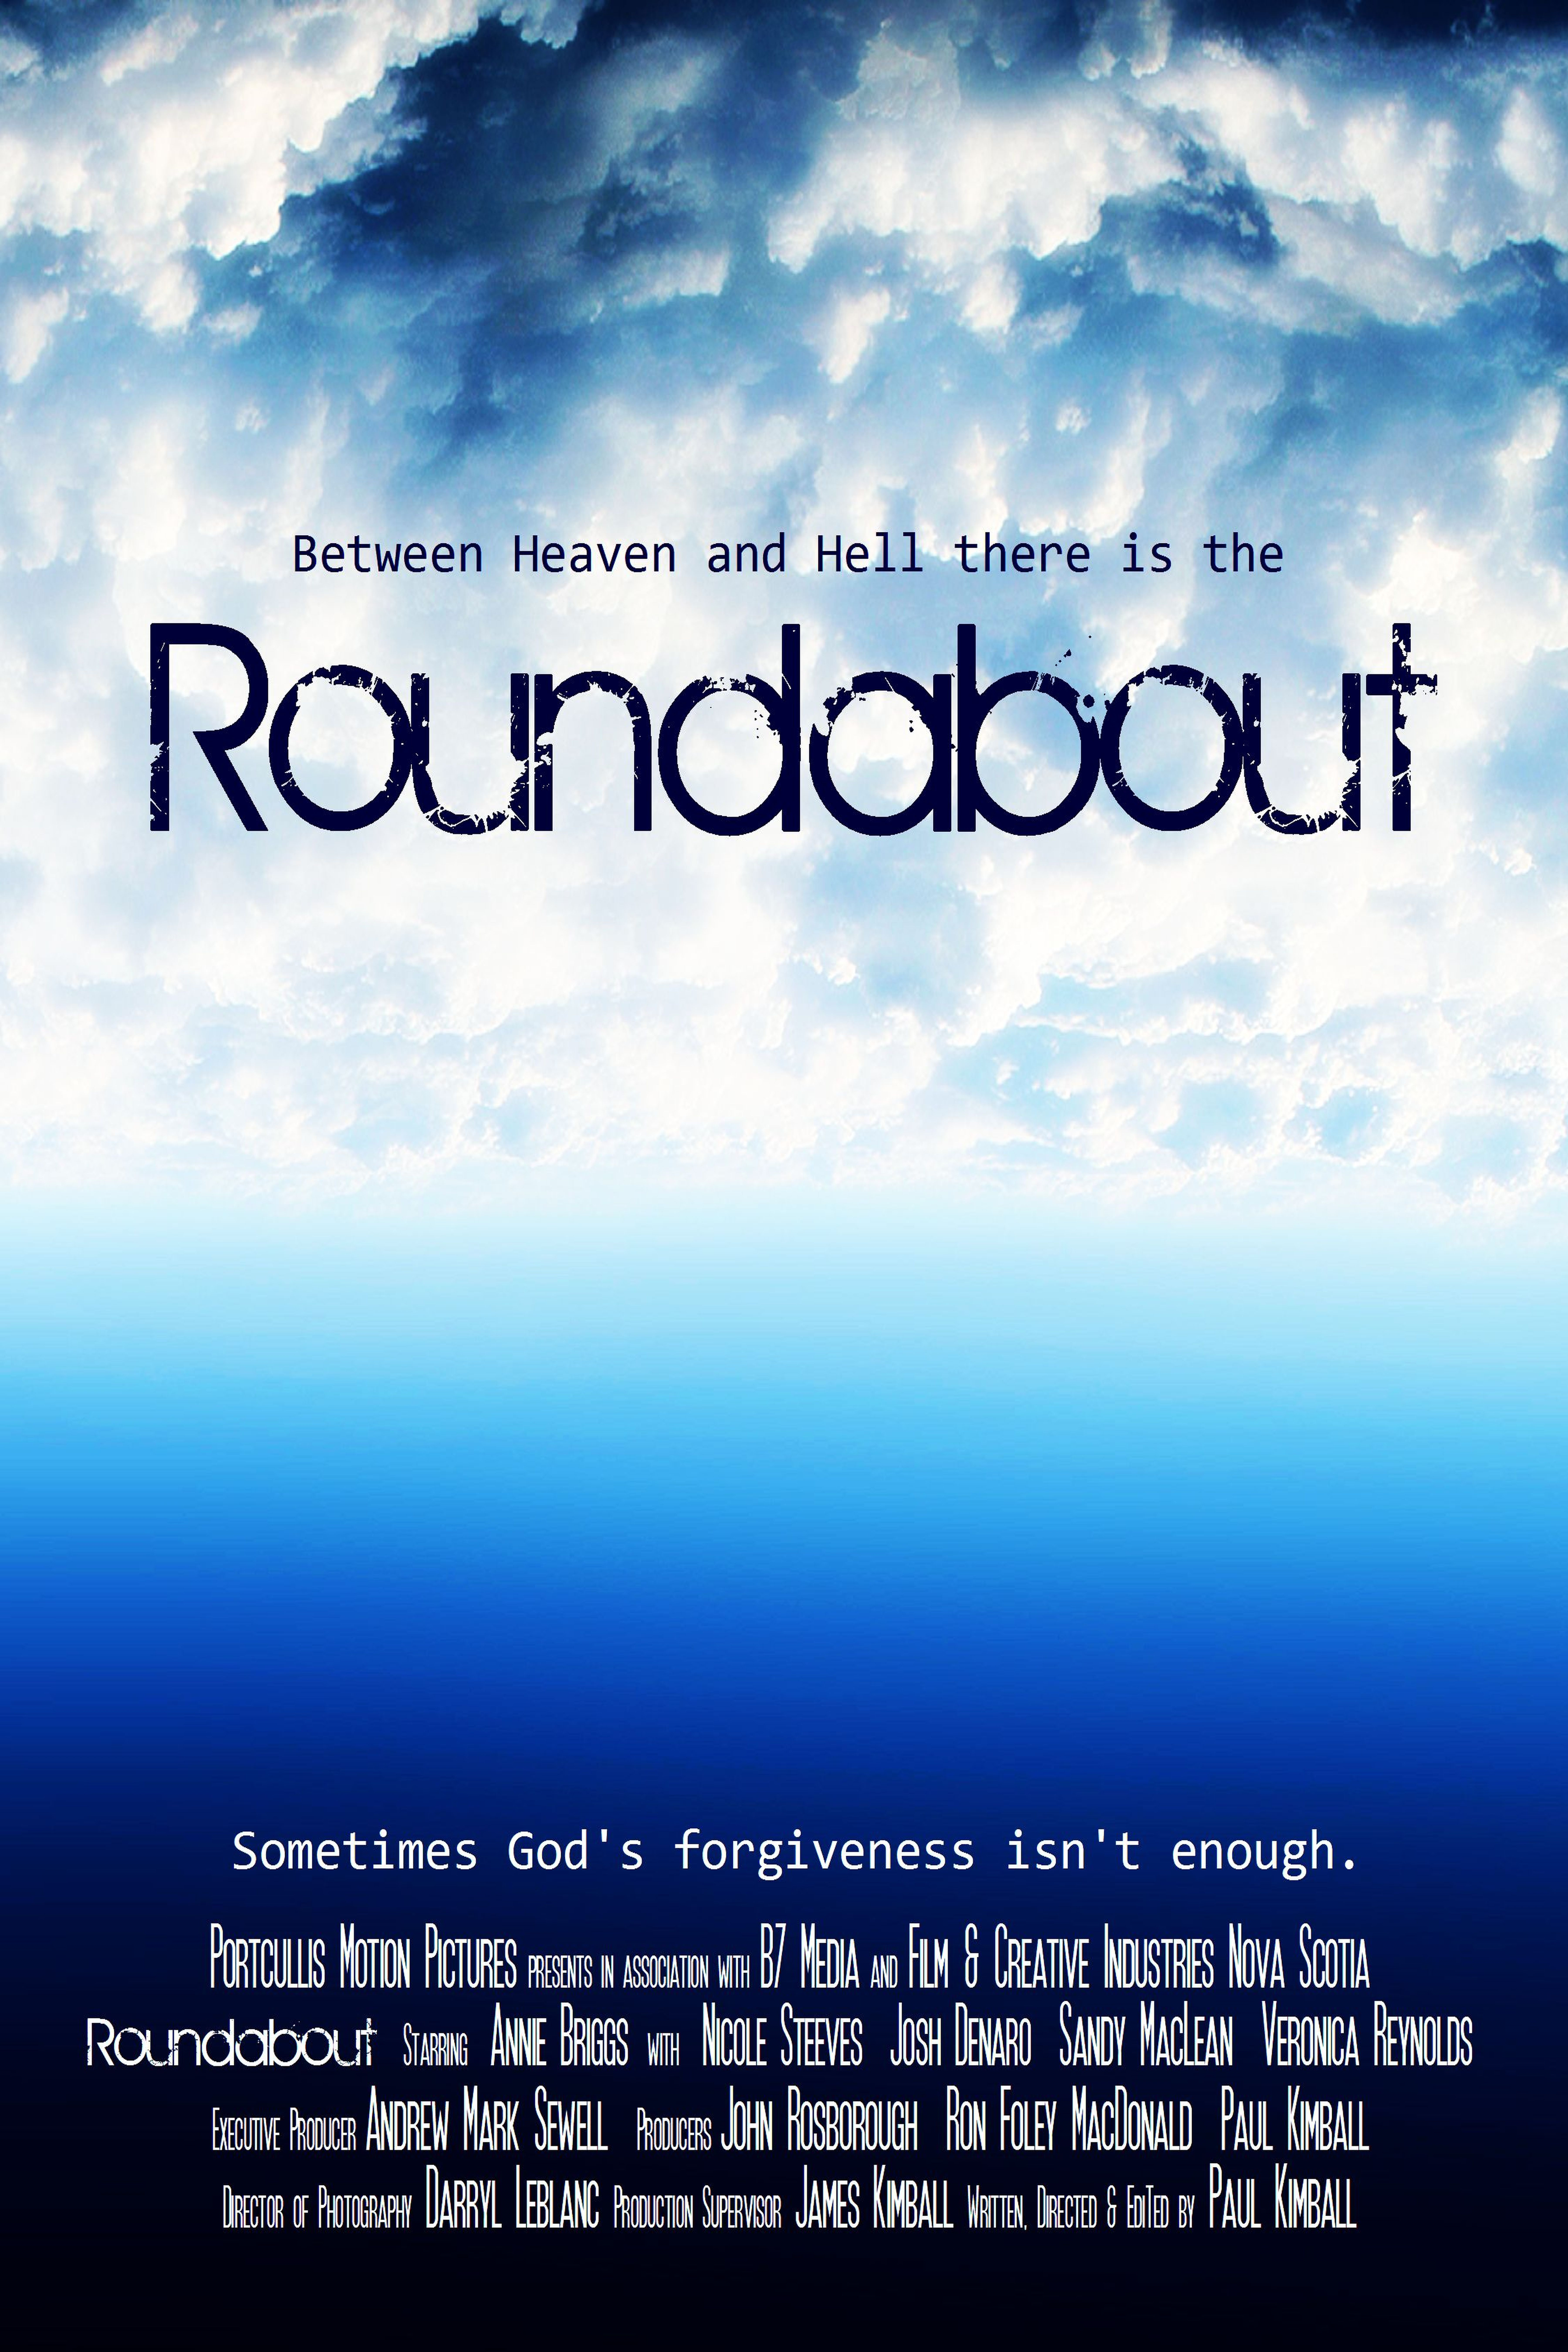 2014 Atlantic Film Festival version of poster for the film Roundabout, written, directed and produced by Paul Kimball.